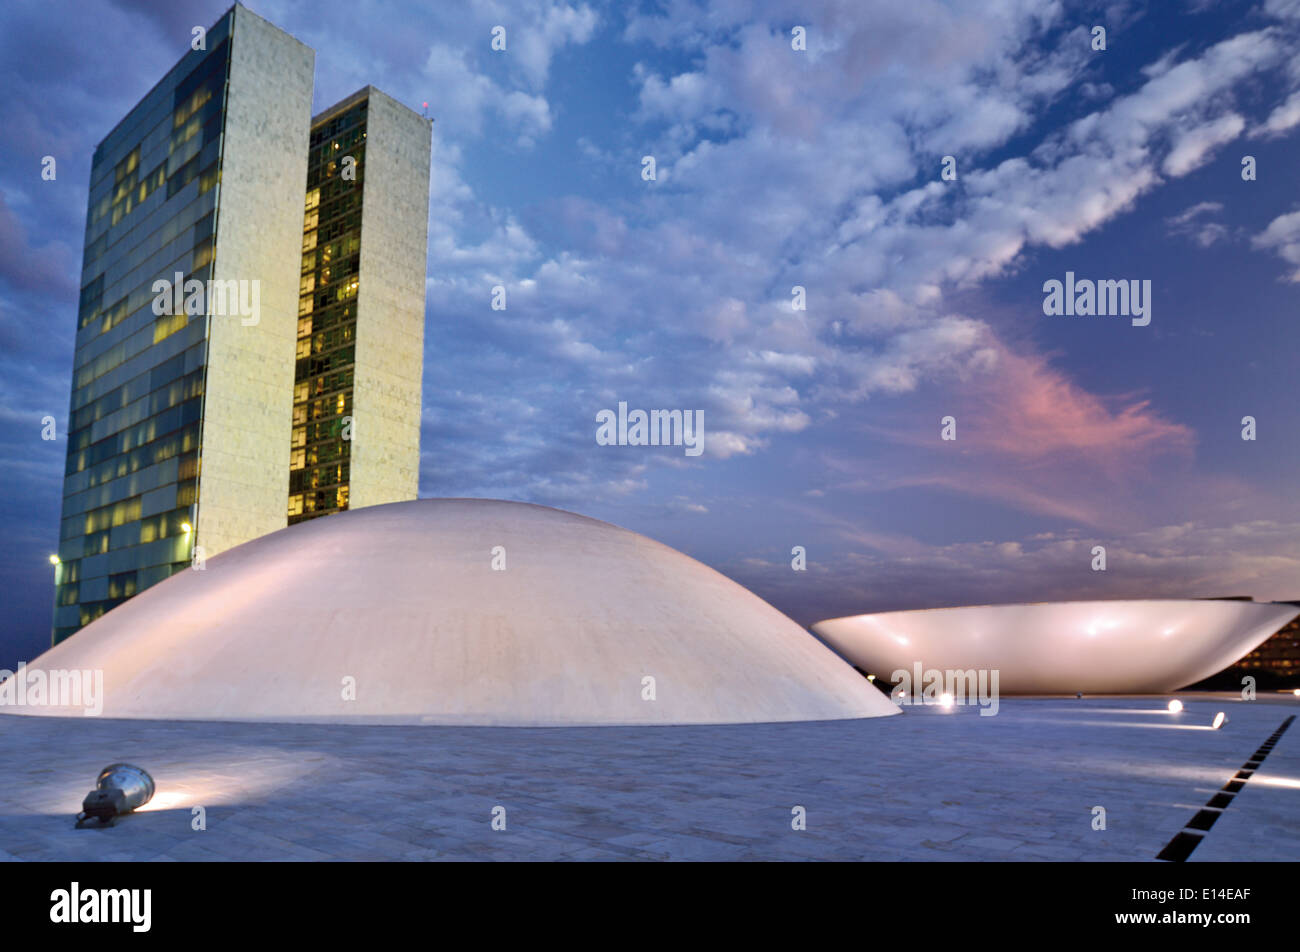 Brazil, Brasilia: Roof perspective of the National Congress at night Stock Photo